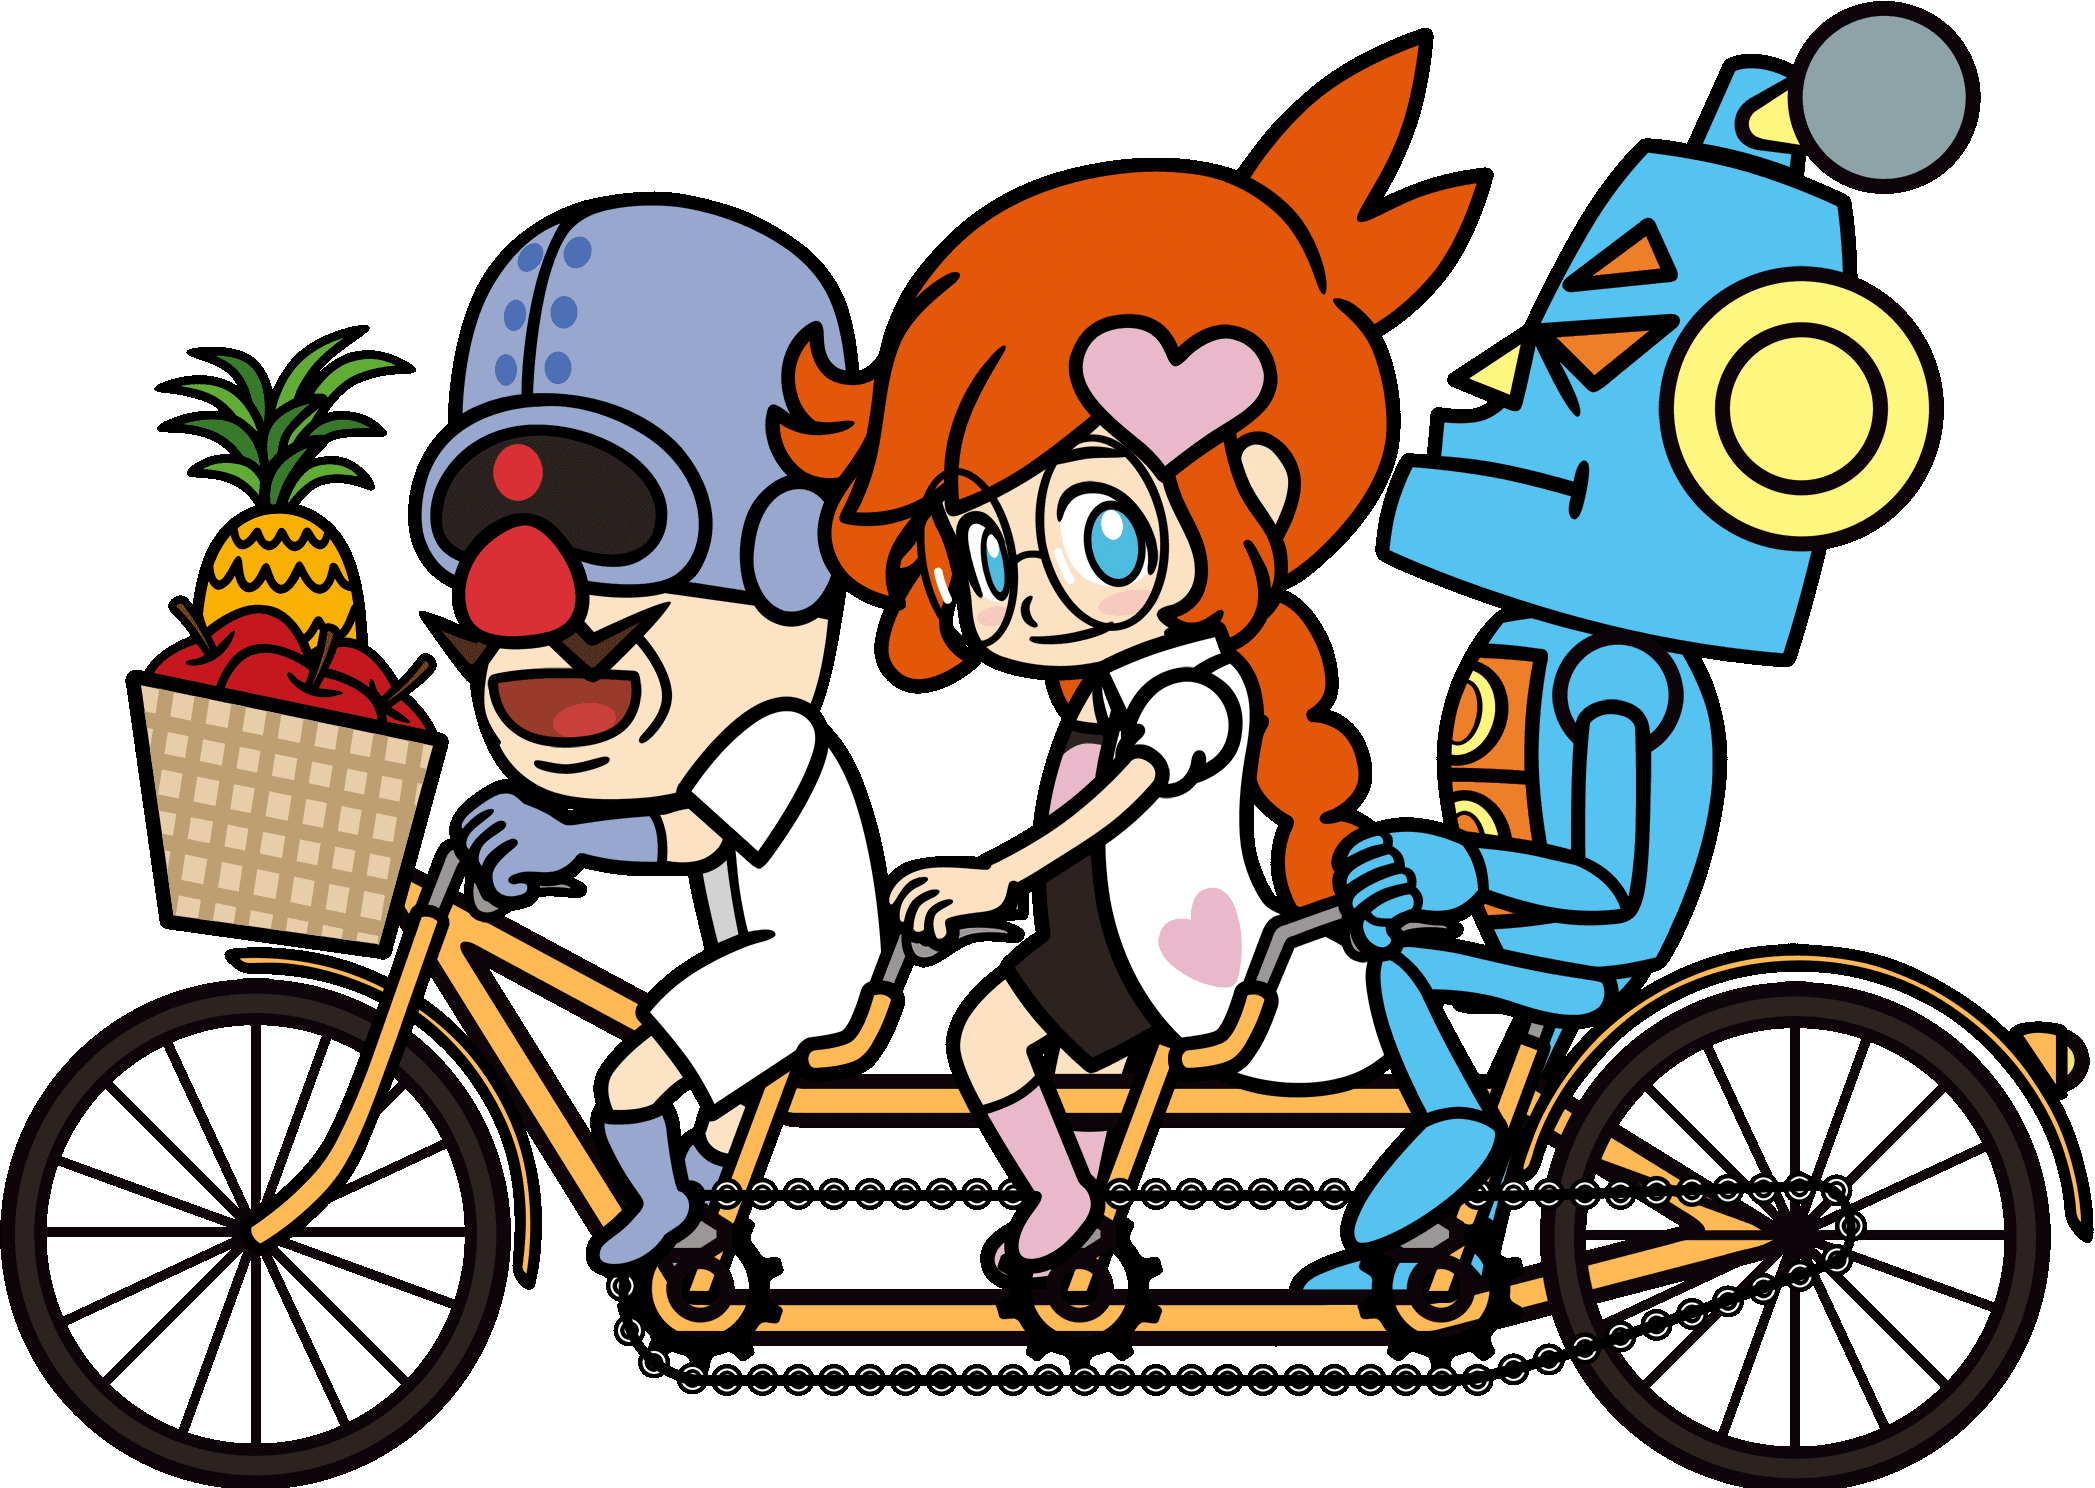 Dr. Crygor, Penny, and Mike